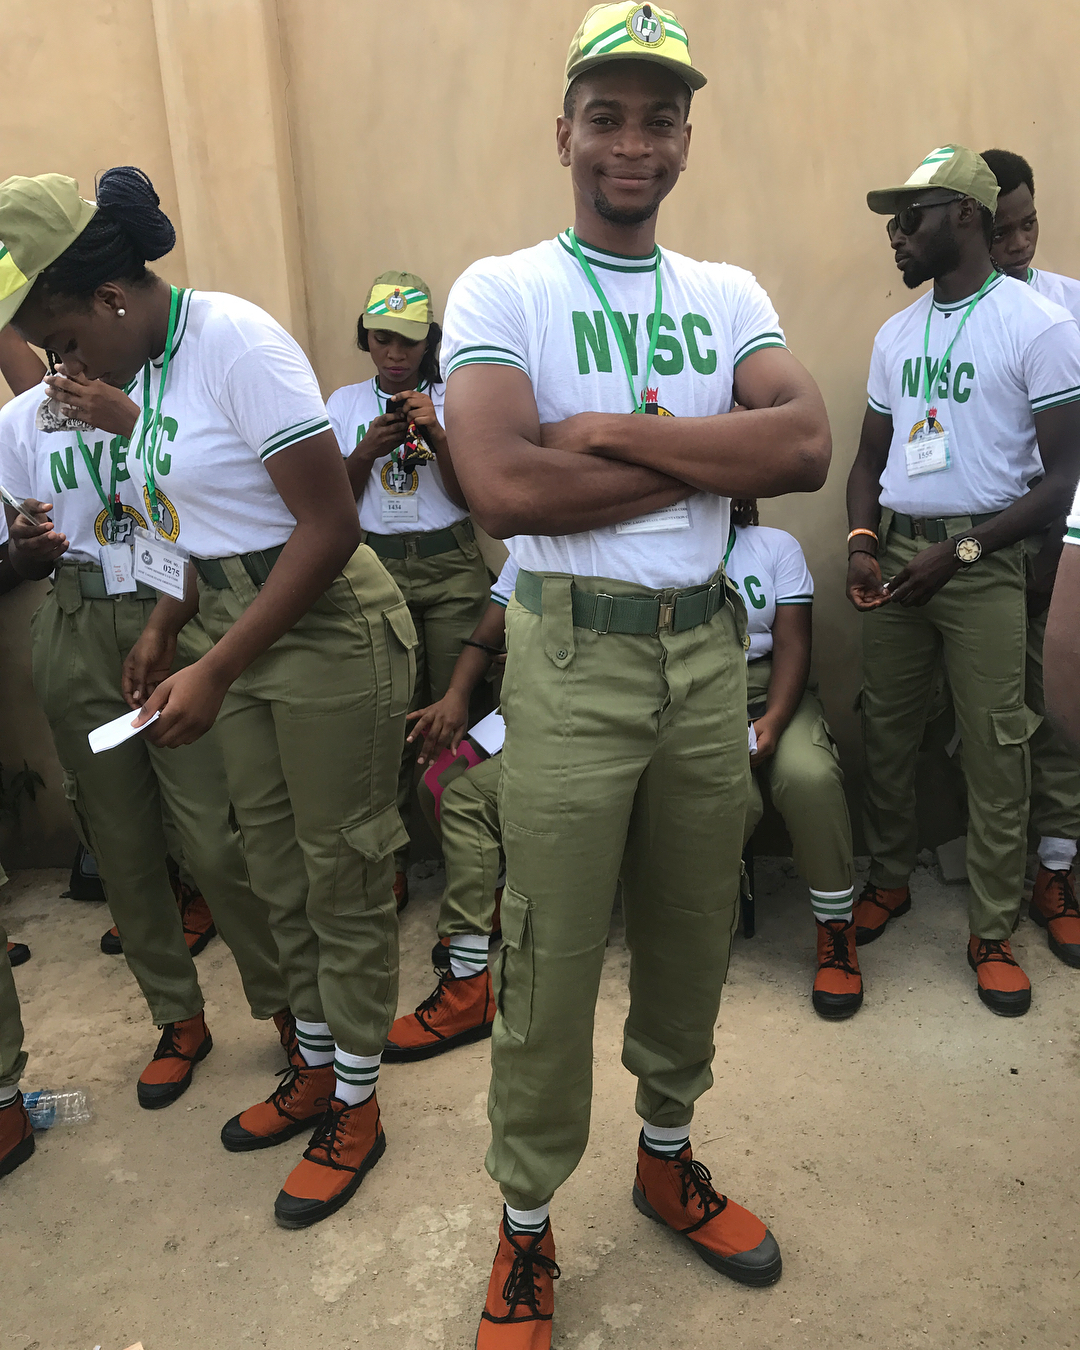 "The Johnsons" Actor, Olumide Oworu "Tari" Shares His NYSC Pictures